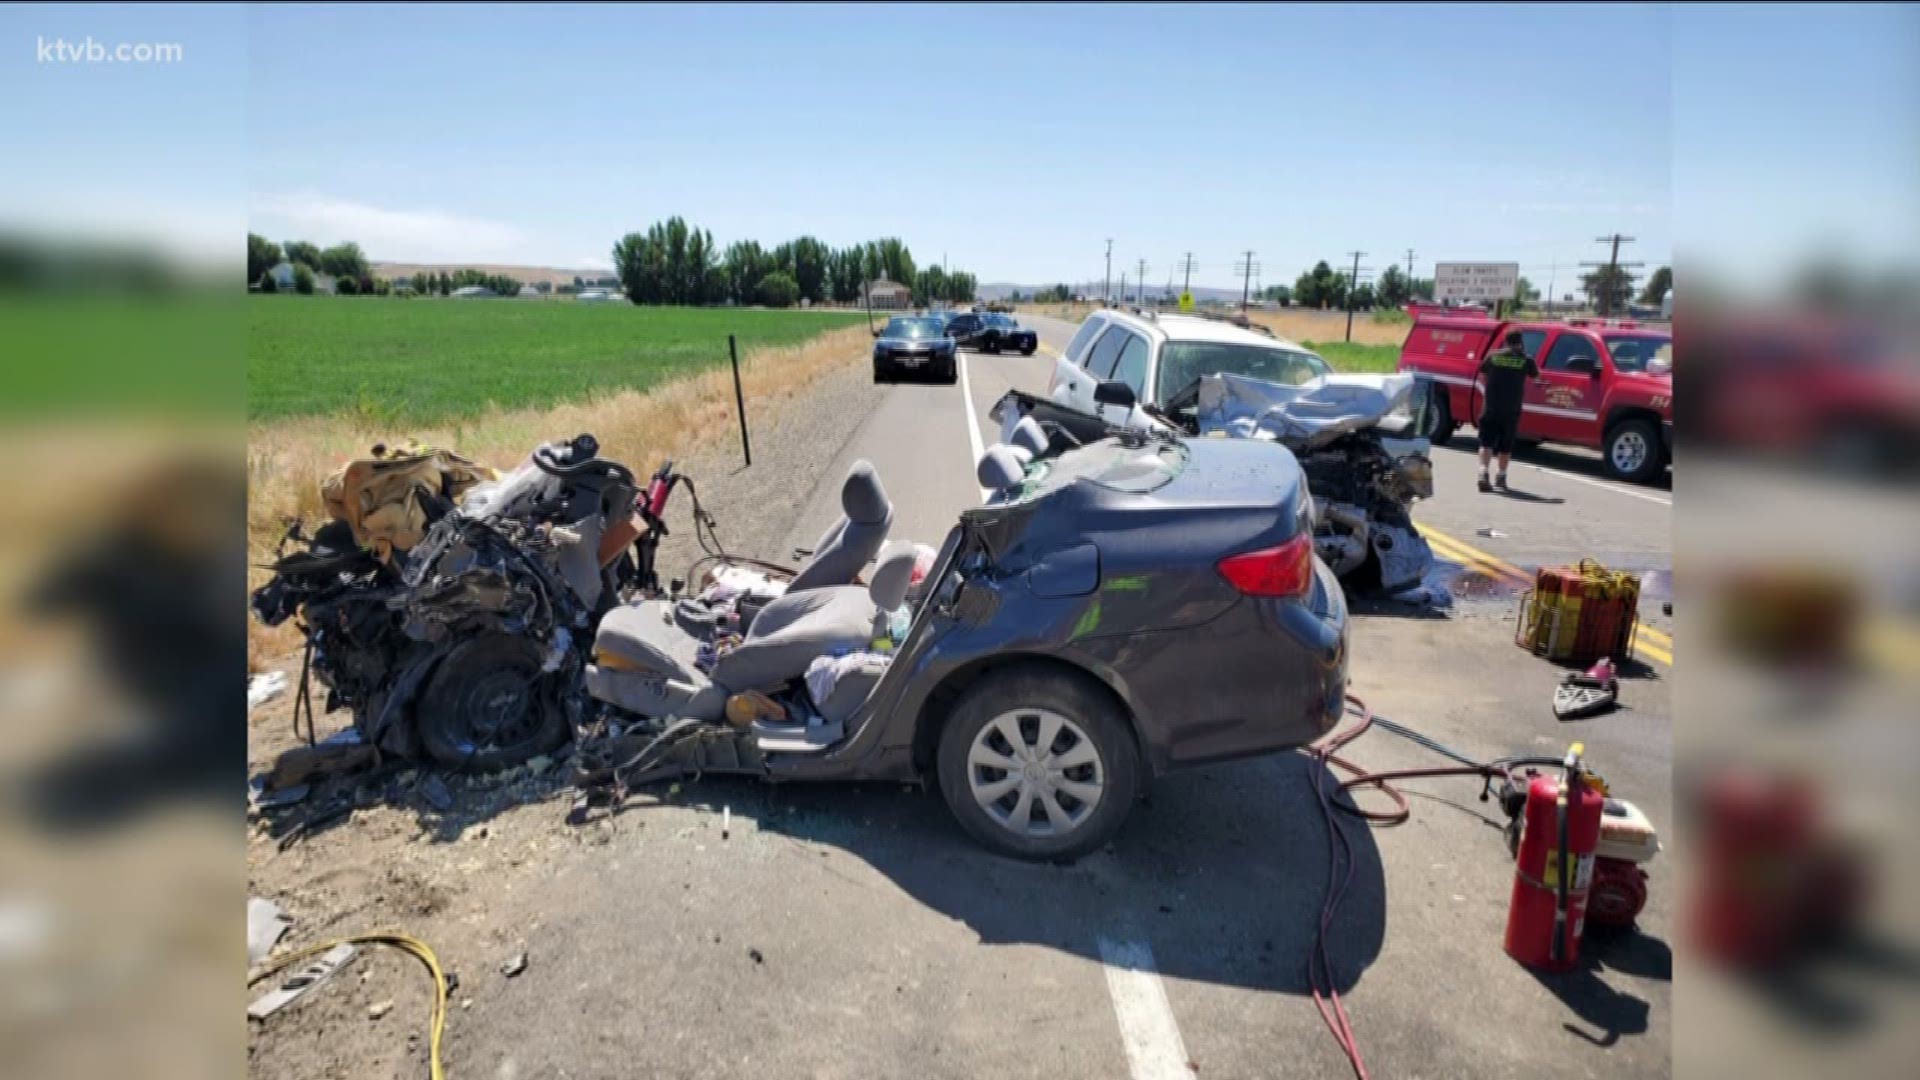 Police say the second crash happened Sunday morning when a 48-year-old woman drifted off the road, then overcorrected and drove into oncoming traffic. The first fatal crash happened when another woman failed to yield at a stop sign and drove into oncoming traffic.